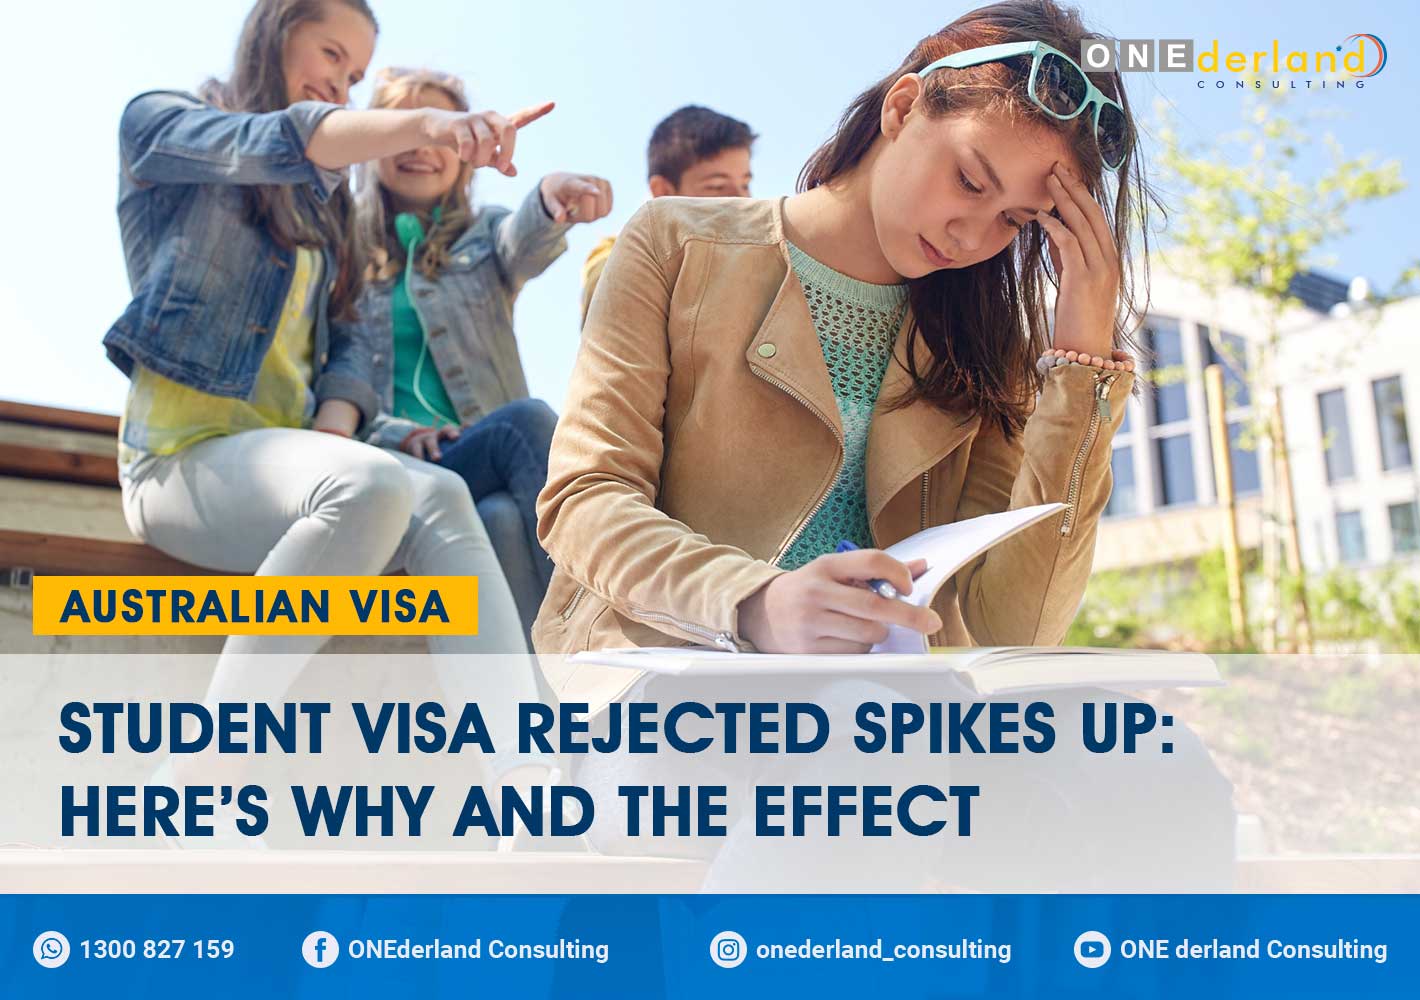 Student Visa Rejected Spikes Up: Here’s Why and the Effect